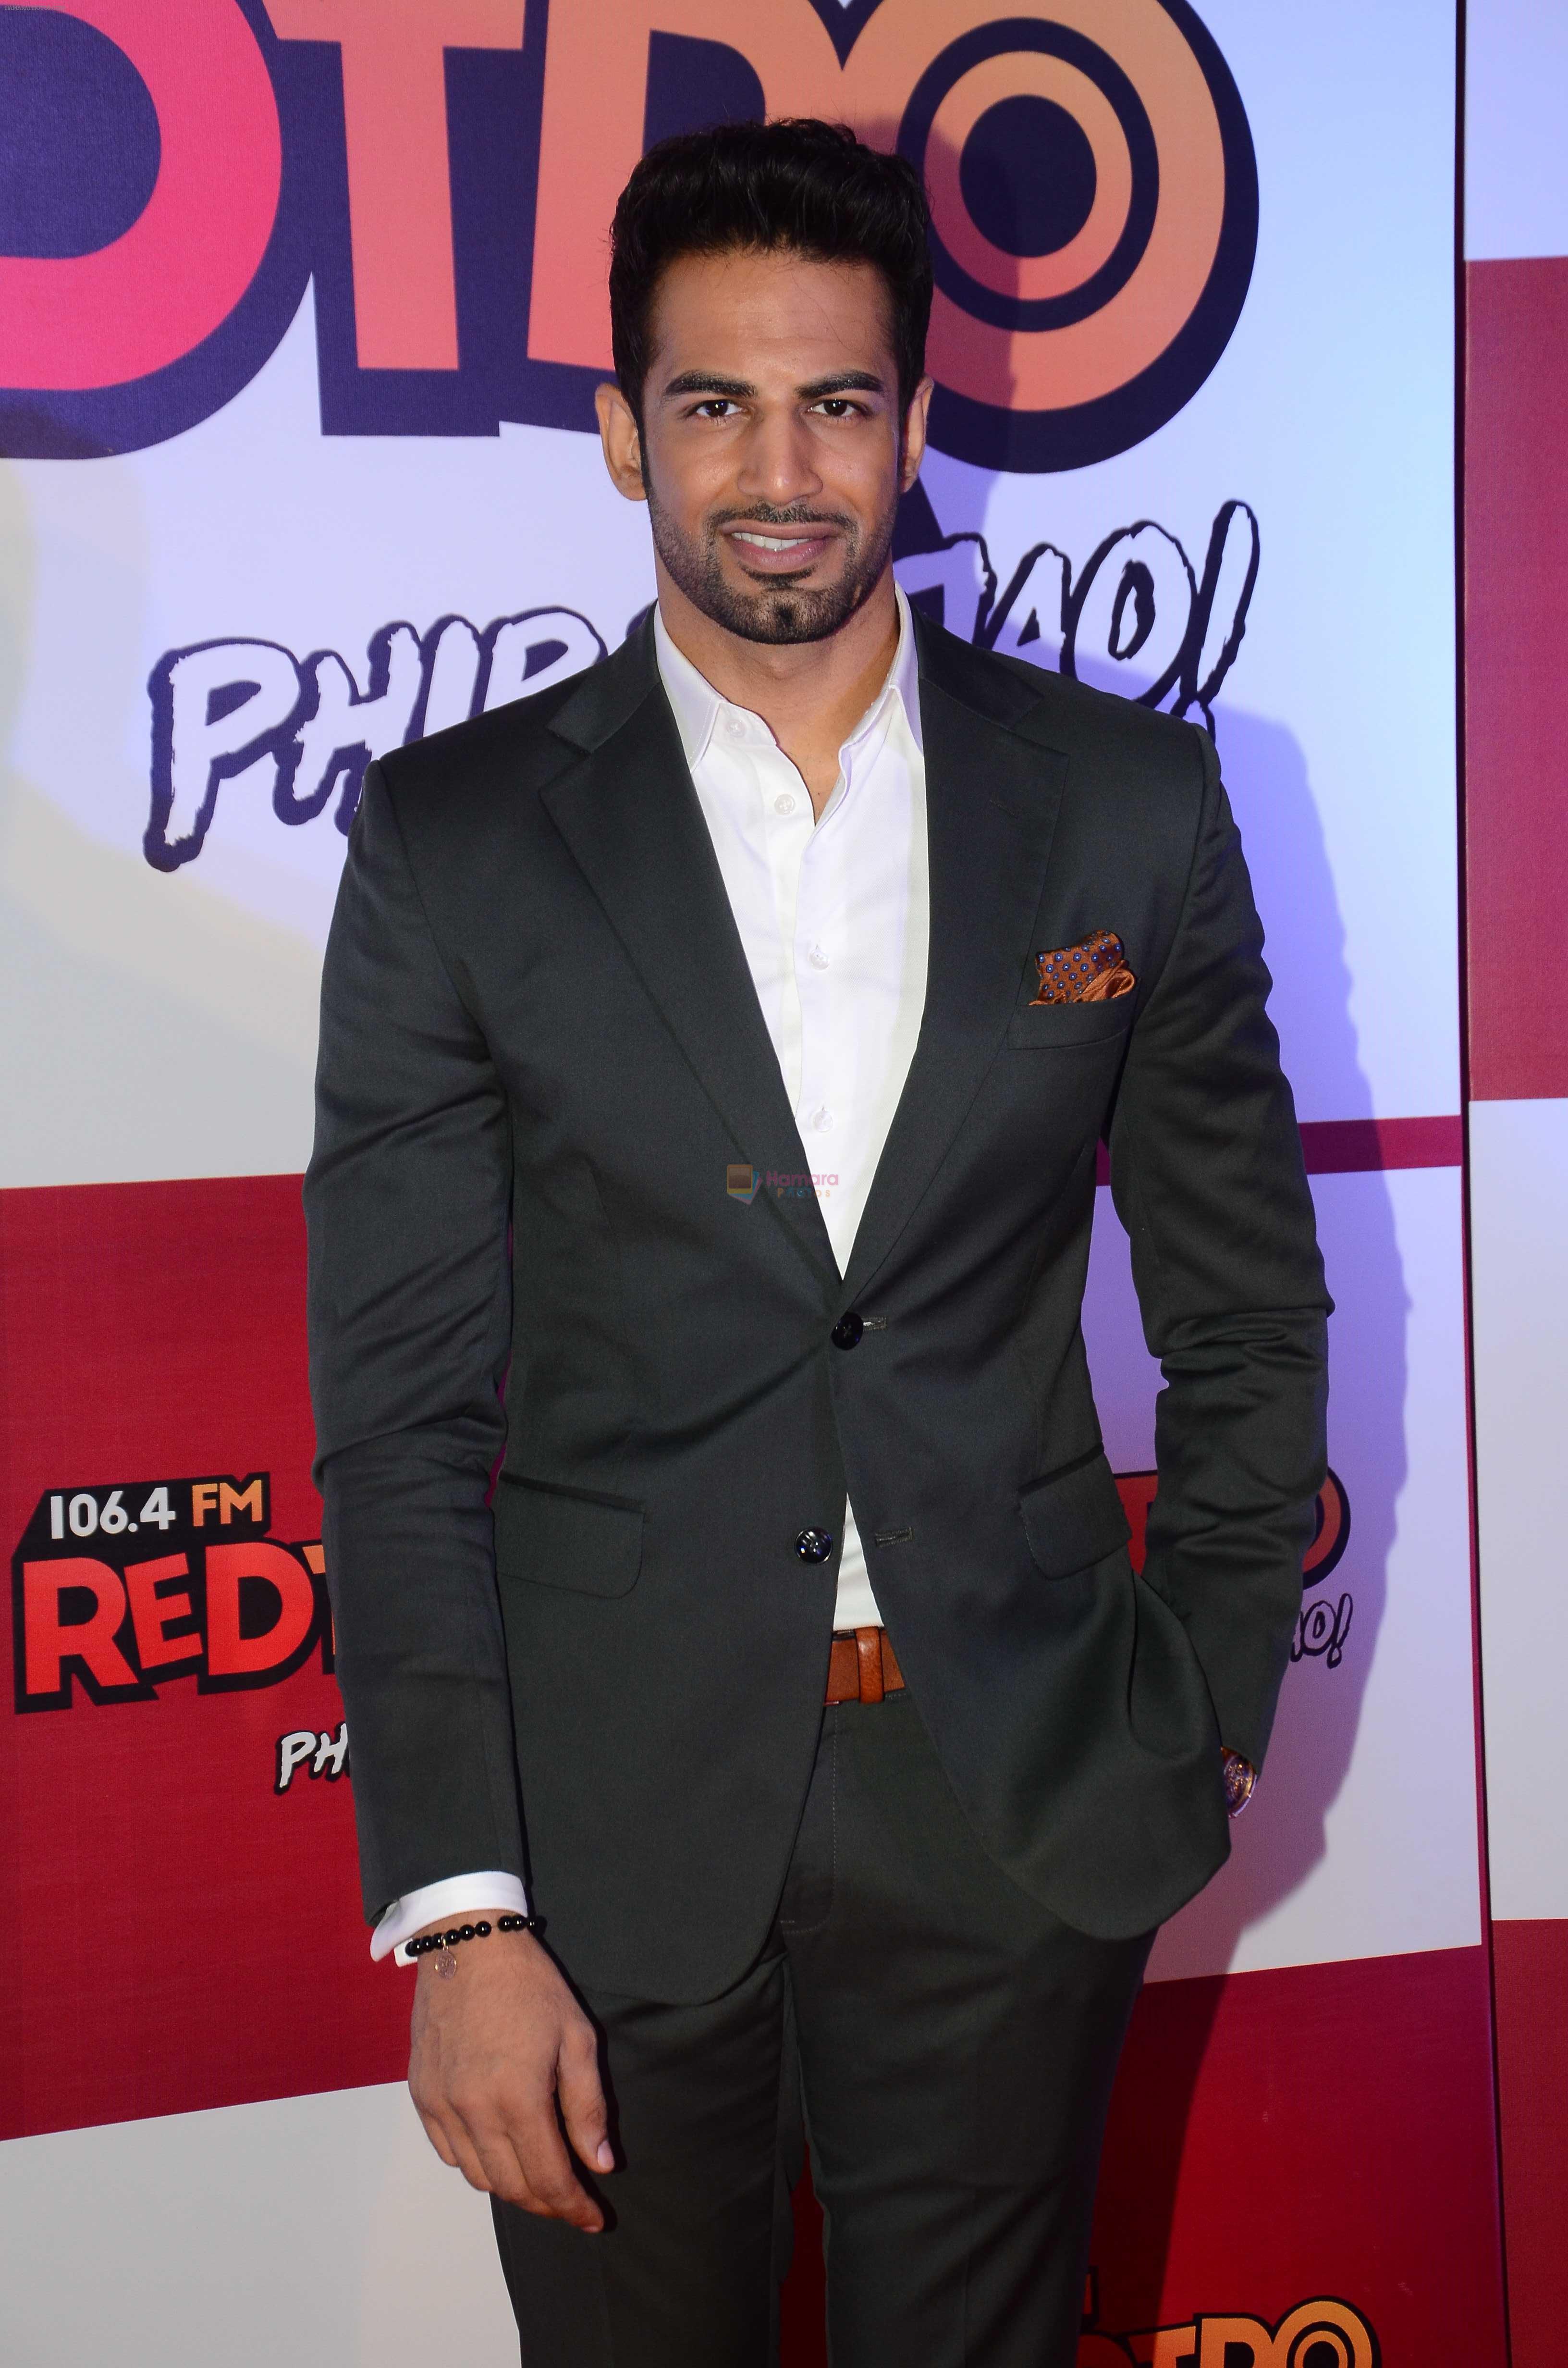 Upen Patel during the party organised by Red FM to celebrate the launch of its new radio station Redtro 106.4 in Mumbai India on 22 July 2016